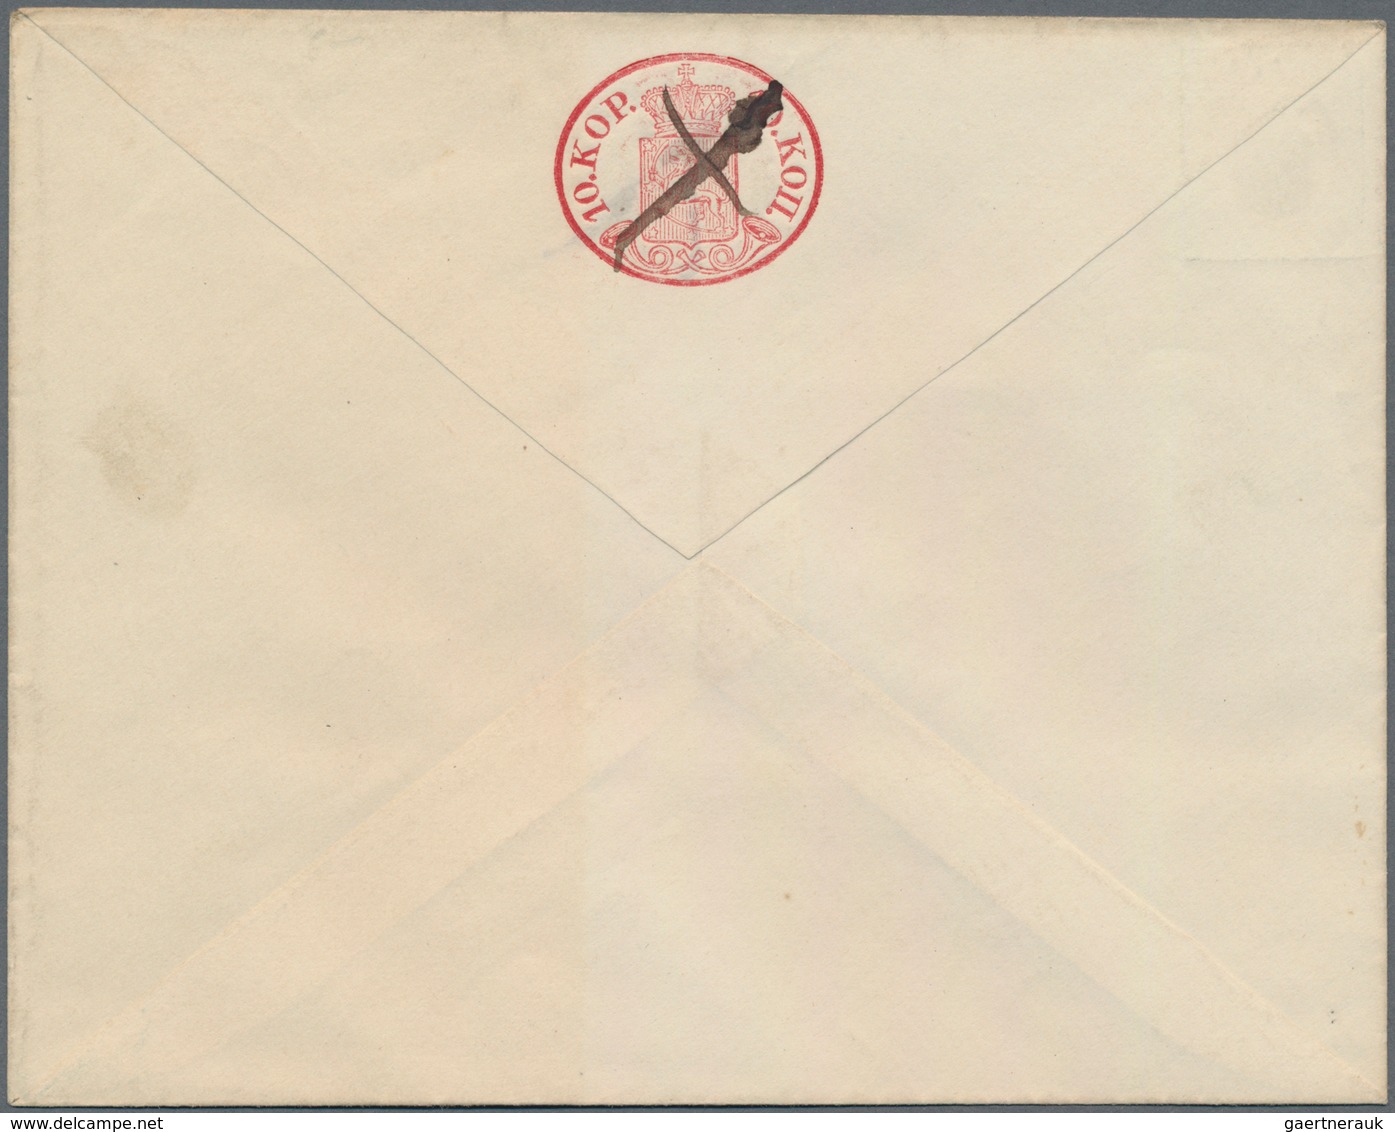 Finnland - Ganzsachen: 1860, 5 K Use Up Envelope With 10 K Coat Of Arms Issue1959 Crossed By Ink. - Ganzsachen